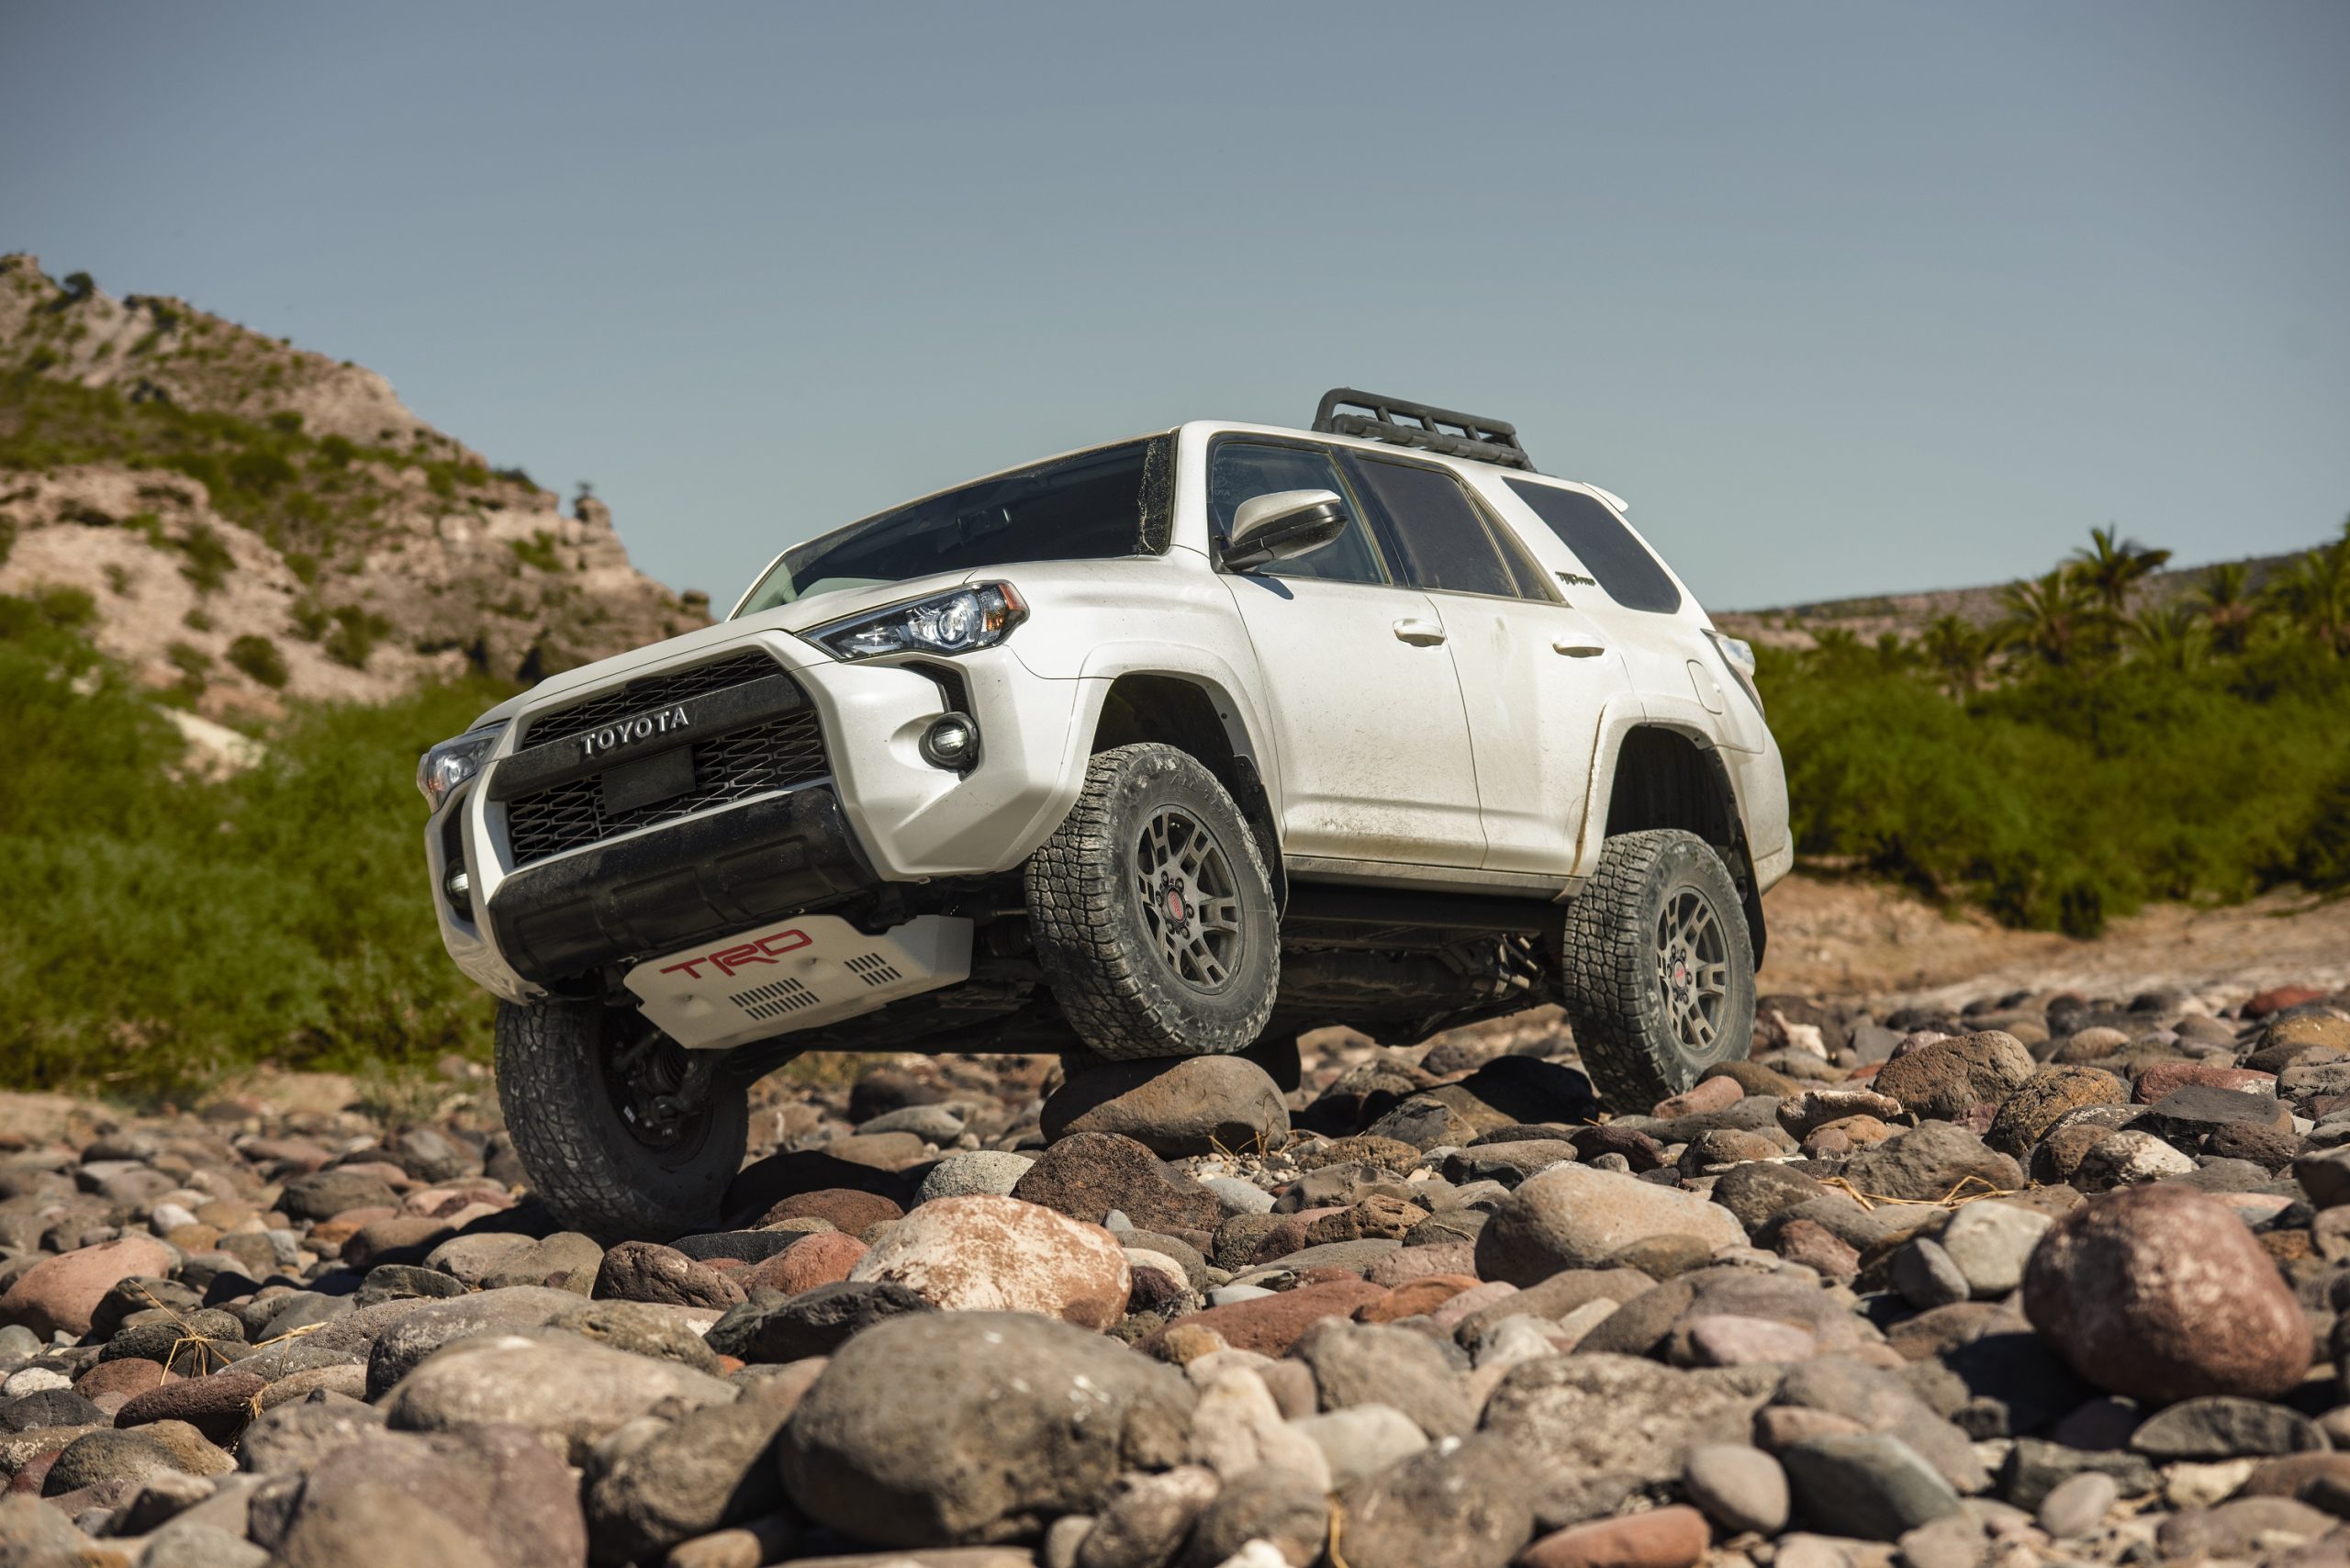 A Toyota 4Runner, one of the fastest selling new cars, climbs some rocks for press photos